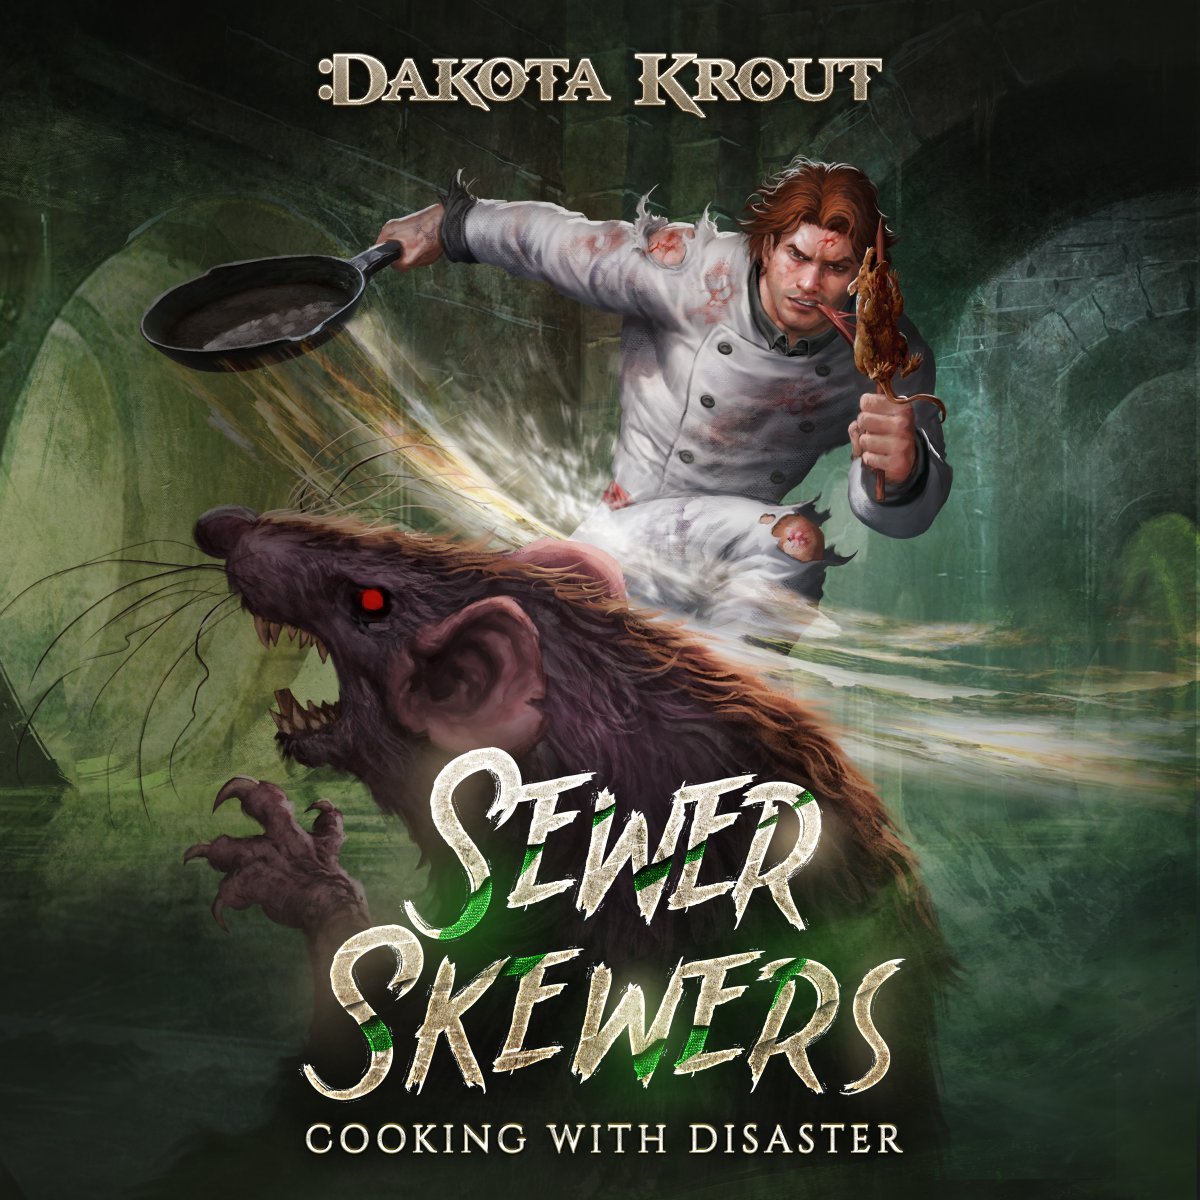 Guess what's just been served? 🍖 Sewer Skewers is hot off the stove and ready to add a unique flavor to your #bookshelf! #ebook - geni.us/CWD2 #audiobook - geni.us/CWD2Audio Thanks to @audible_com and @MacLeodAndrews! #BookTwitter #booktwt #fantasybooks